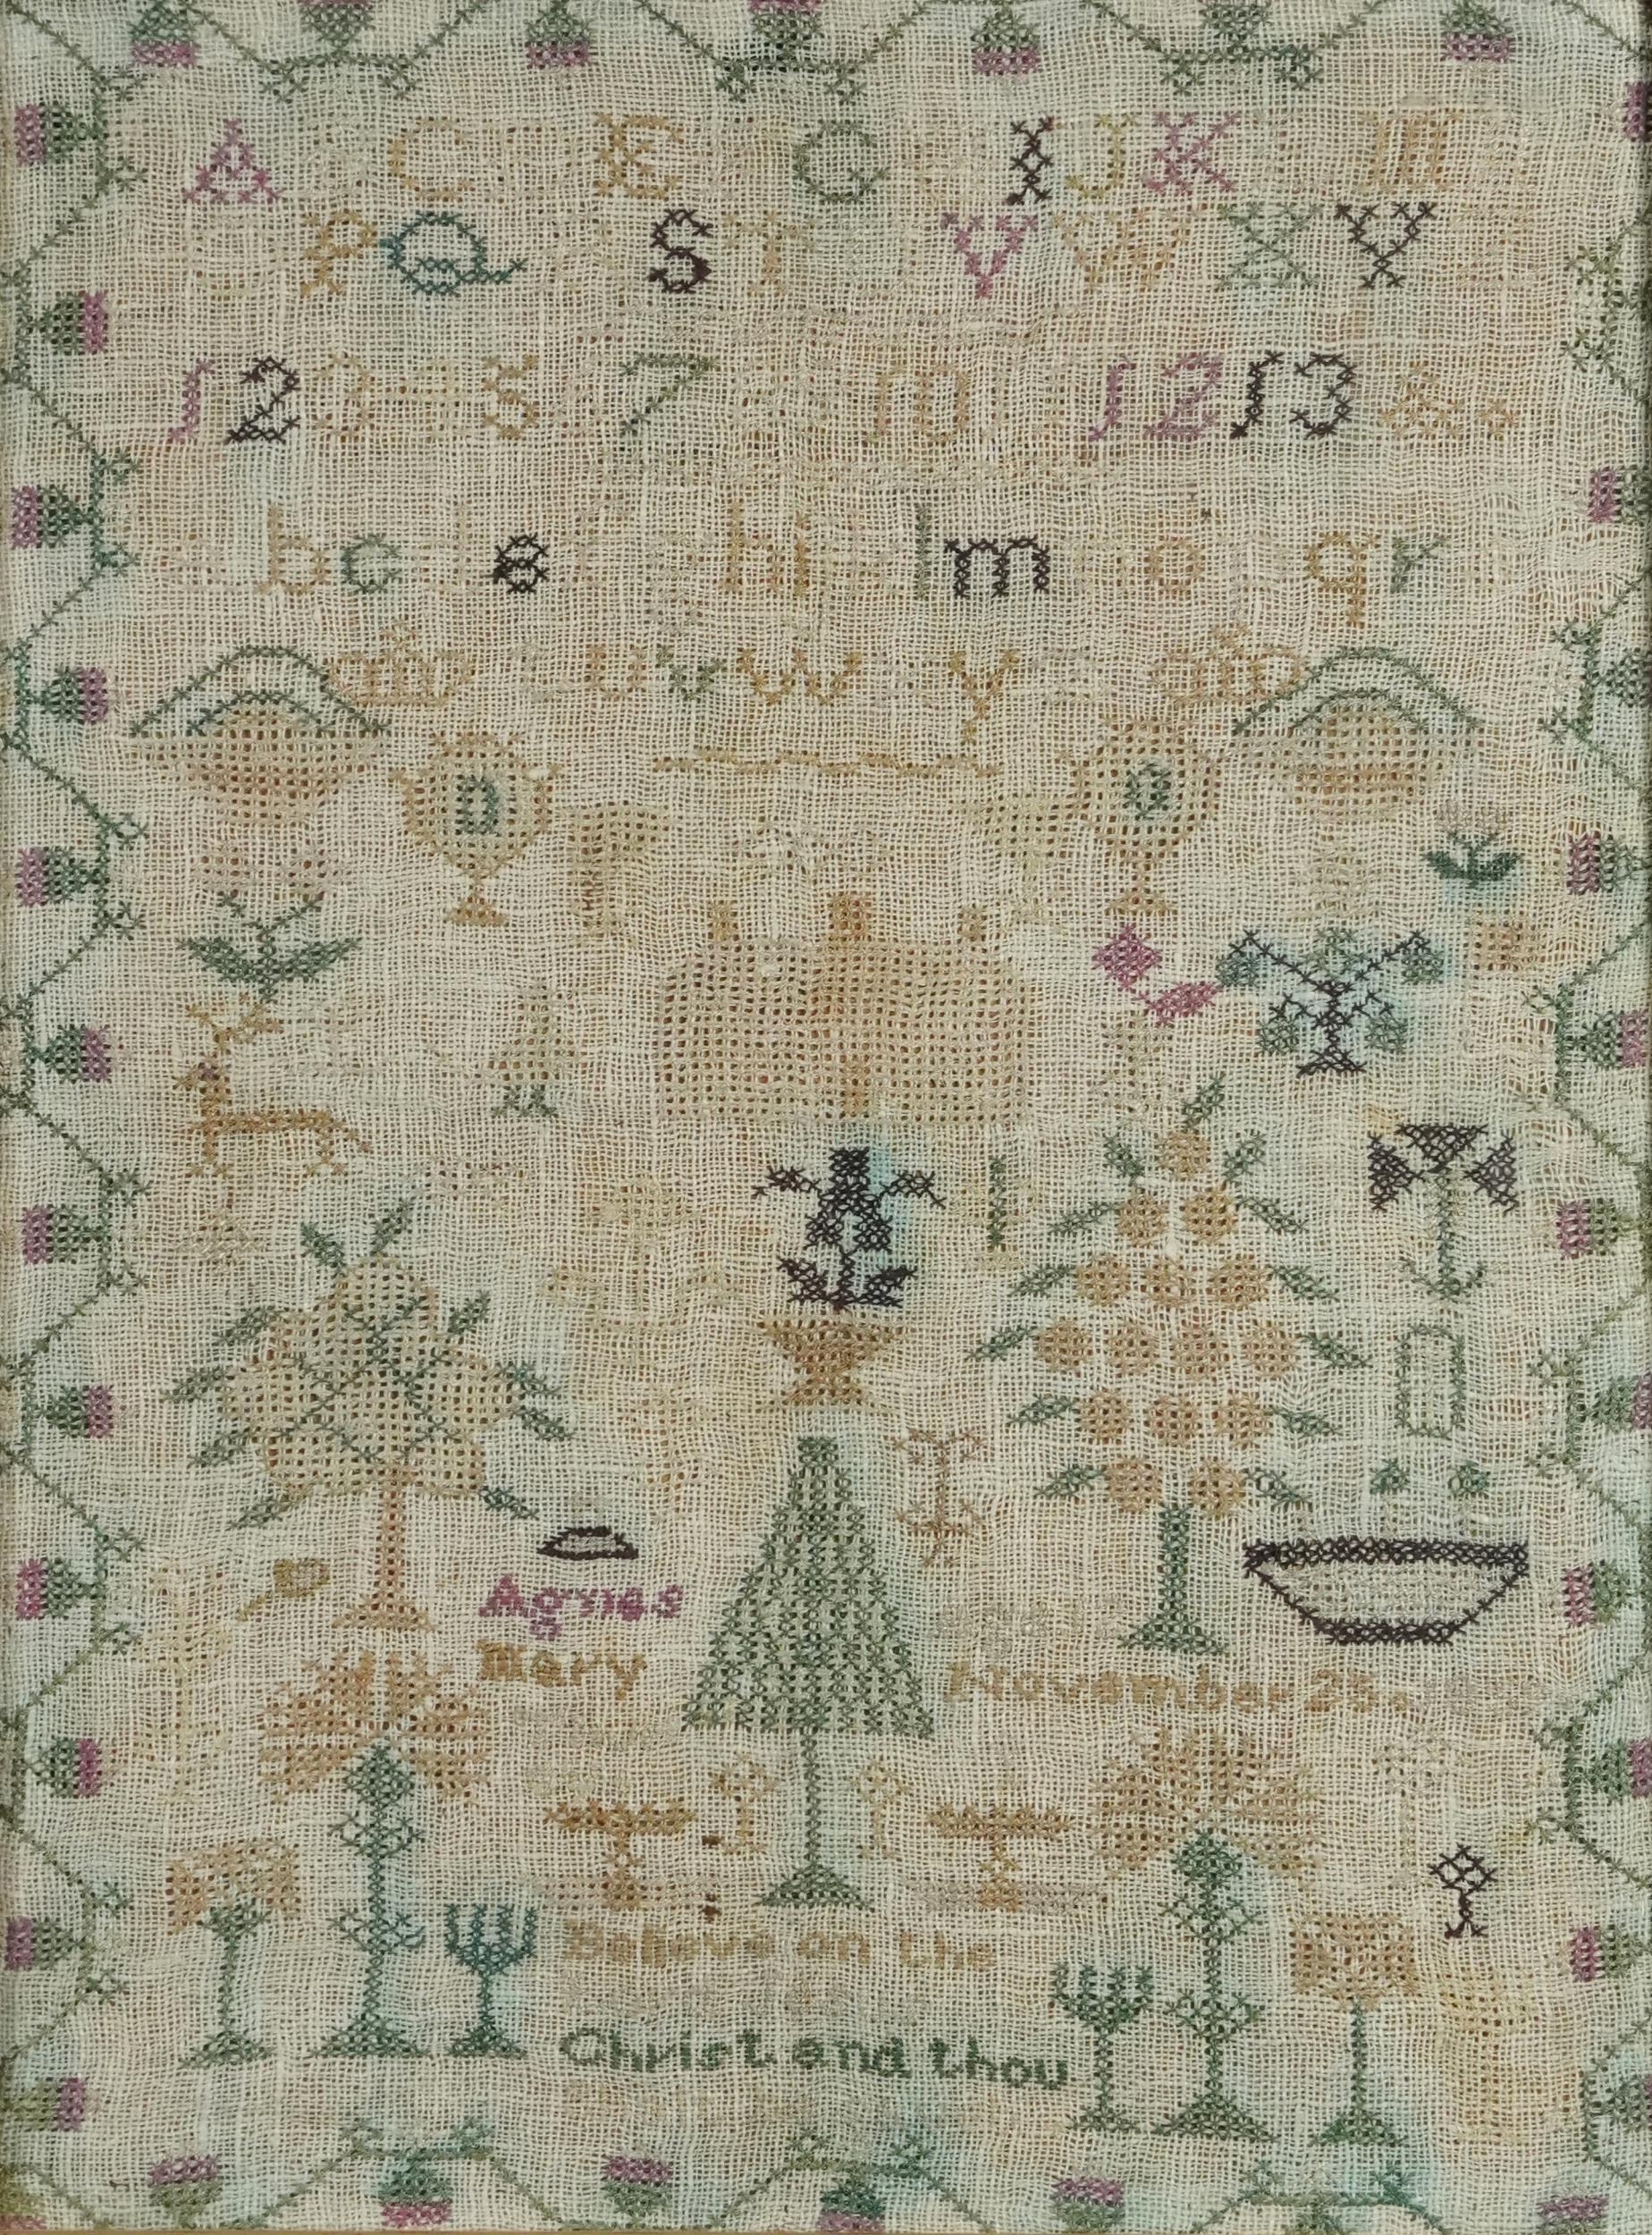 Antique needlework sampler worked by Agnes Mary age 12, framed and glazed, 40cm x 30cm excluding the